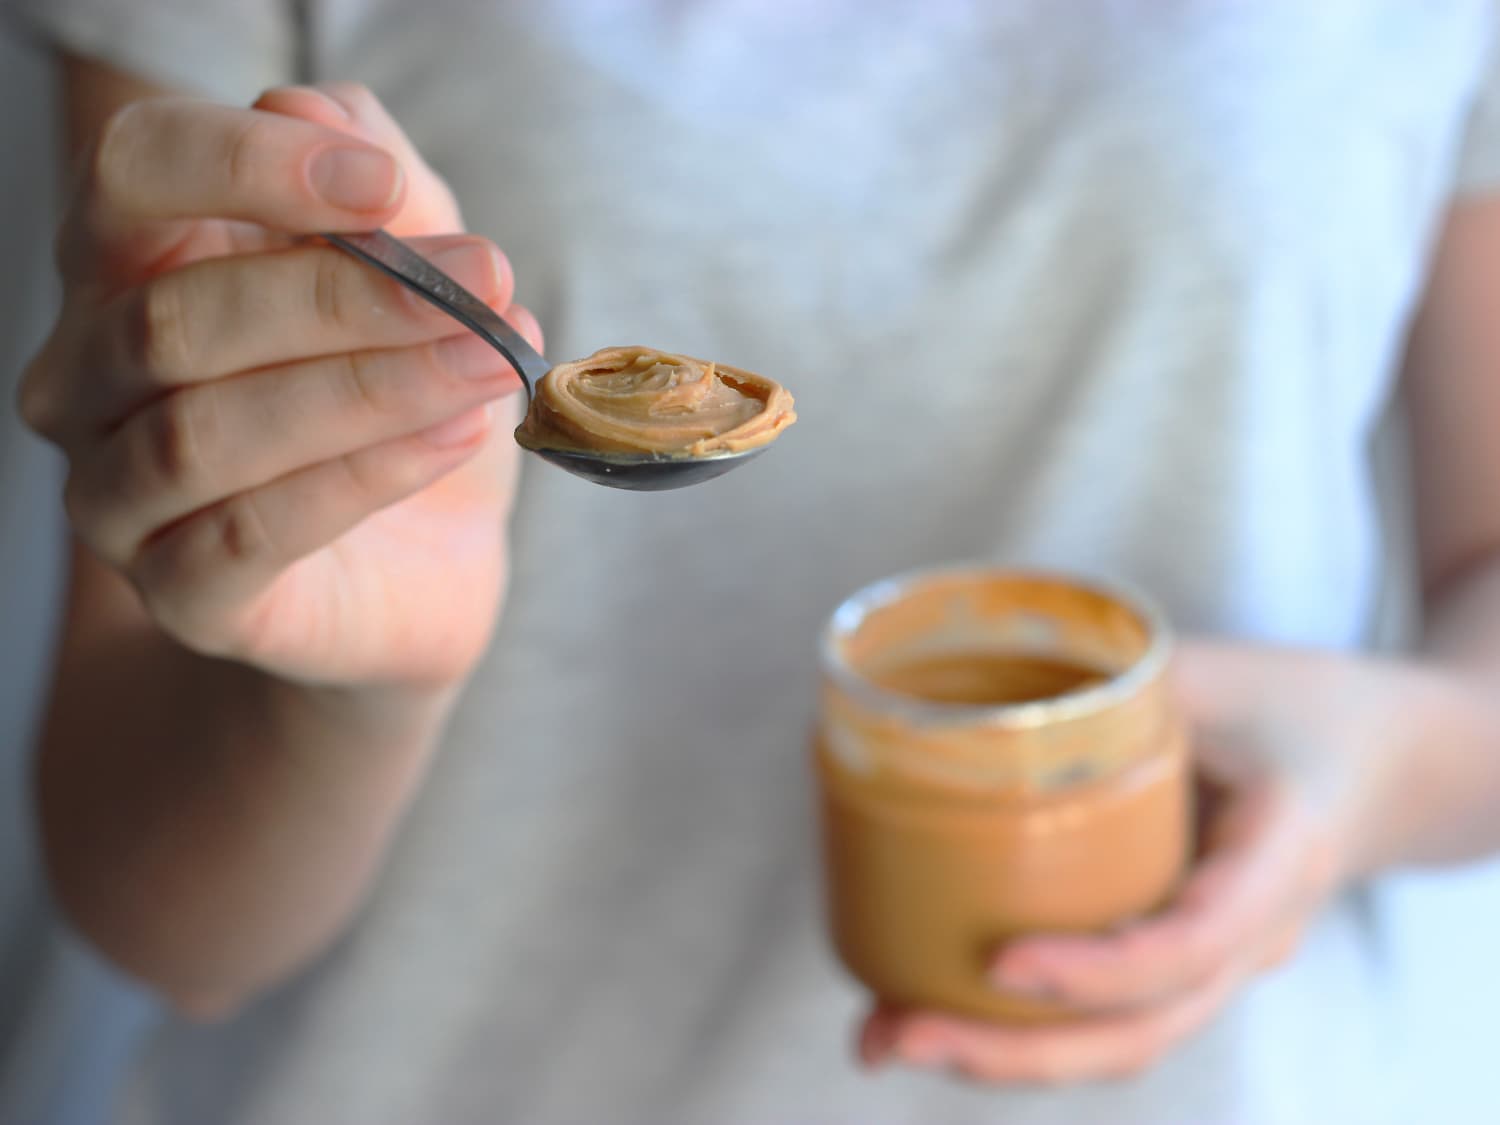 The Peanut Butter Solution Is the Scariest Movie Ever | Kitchn